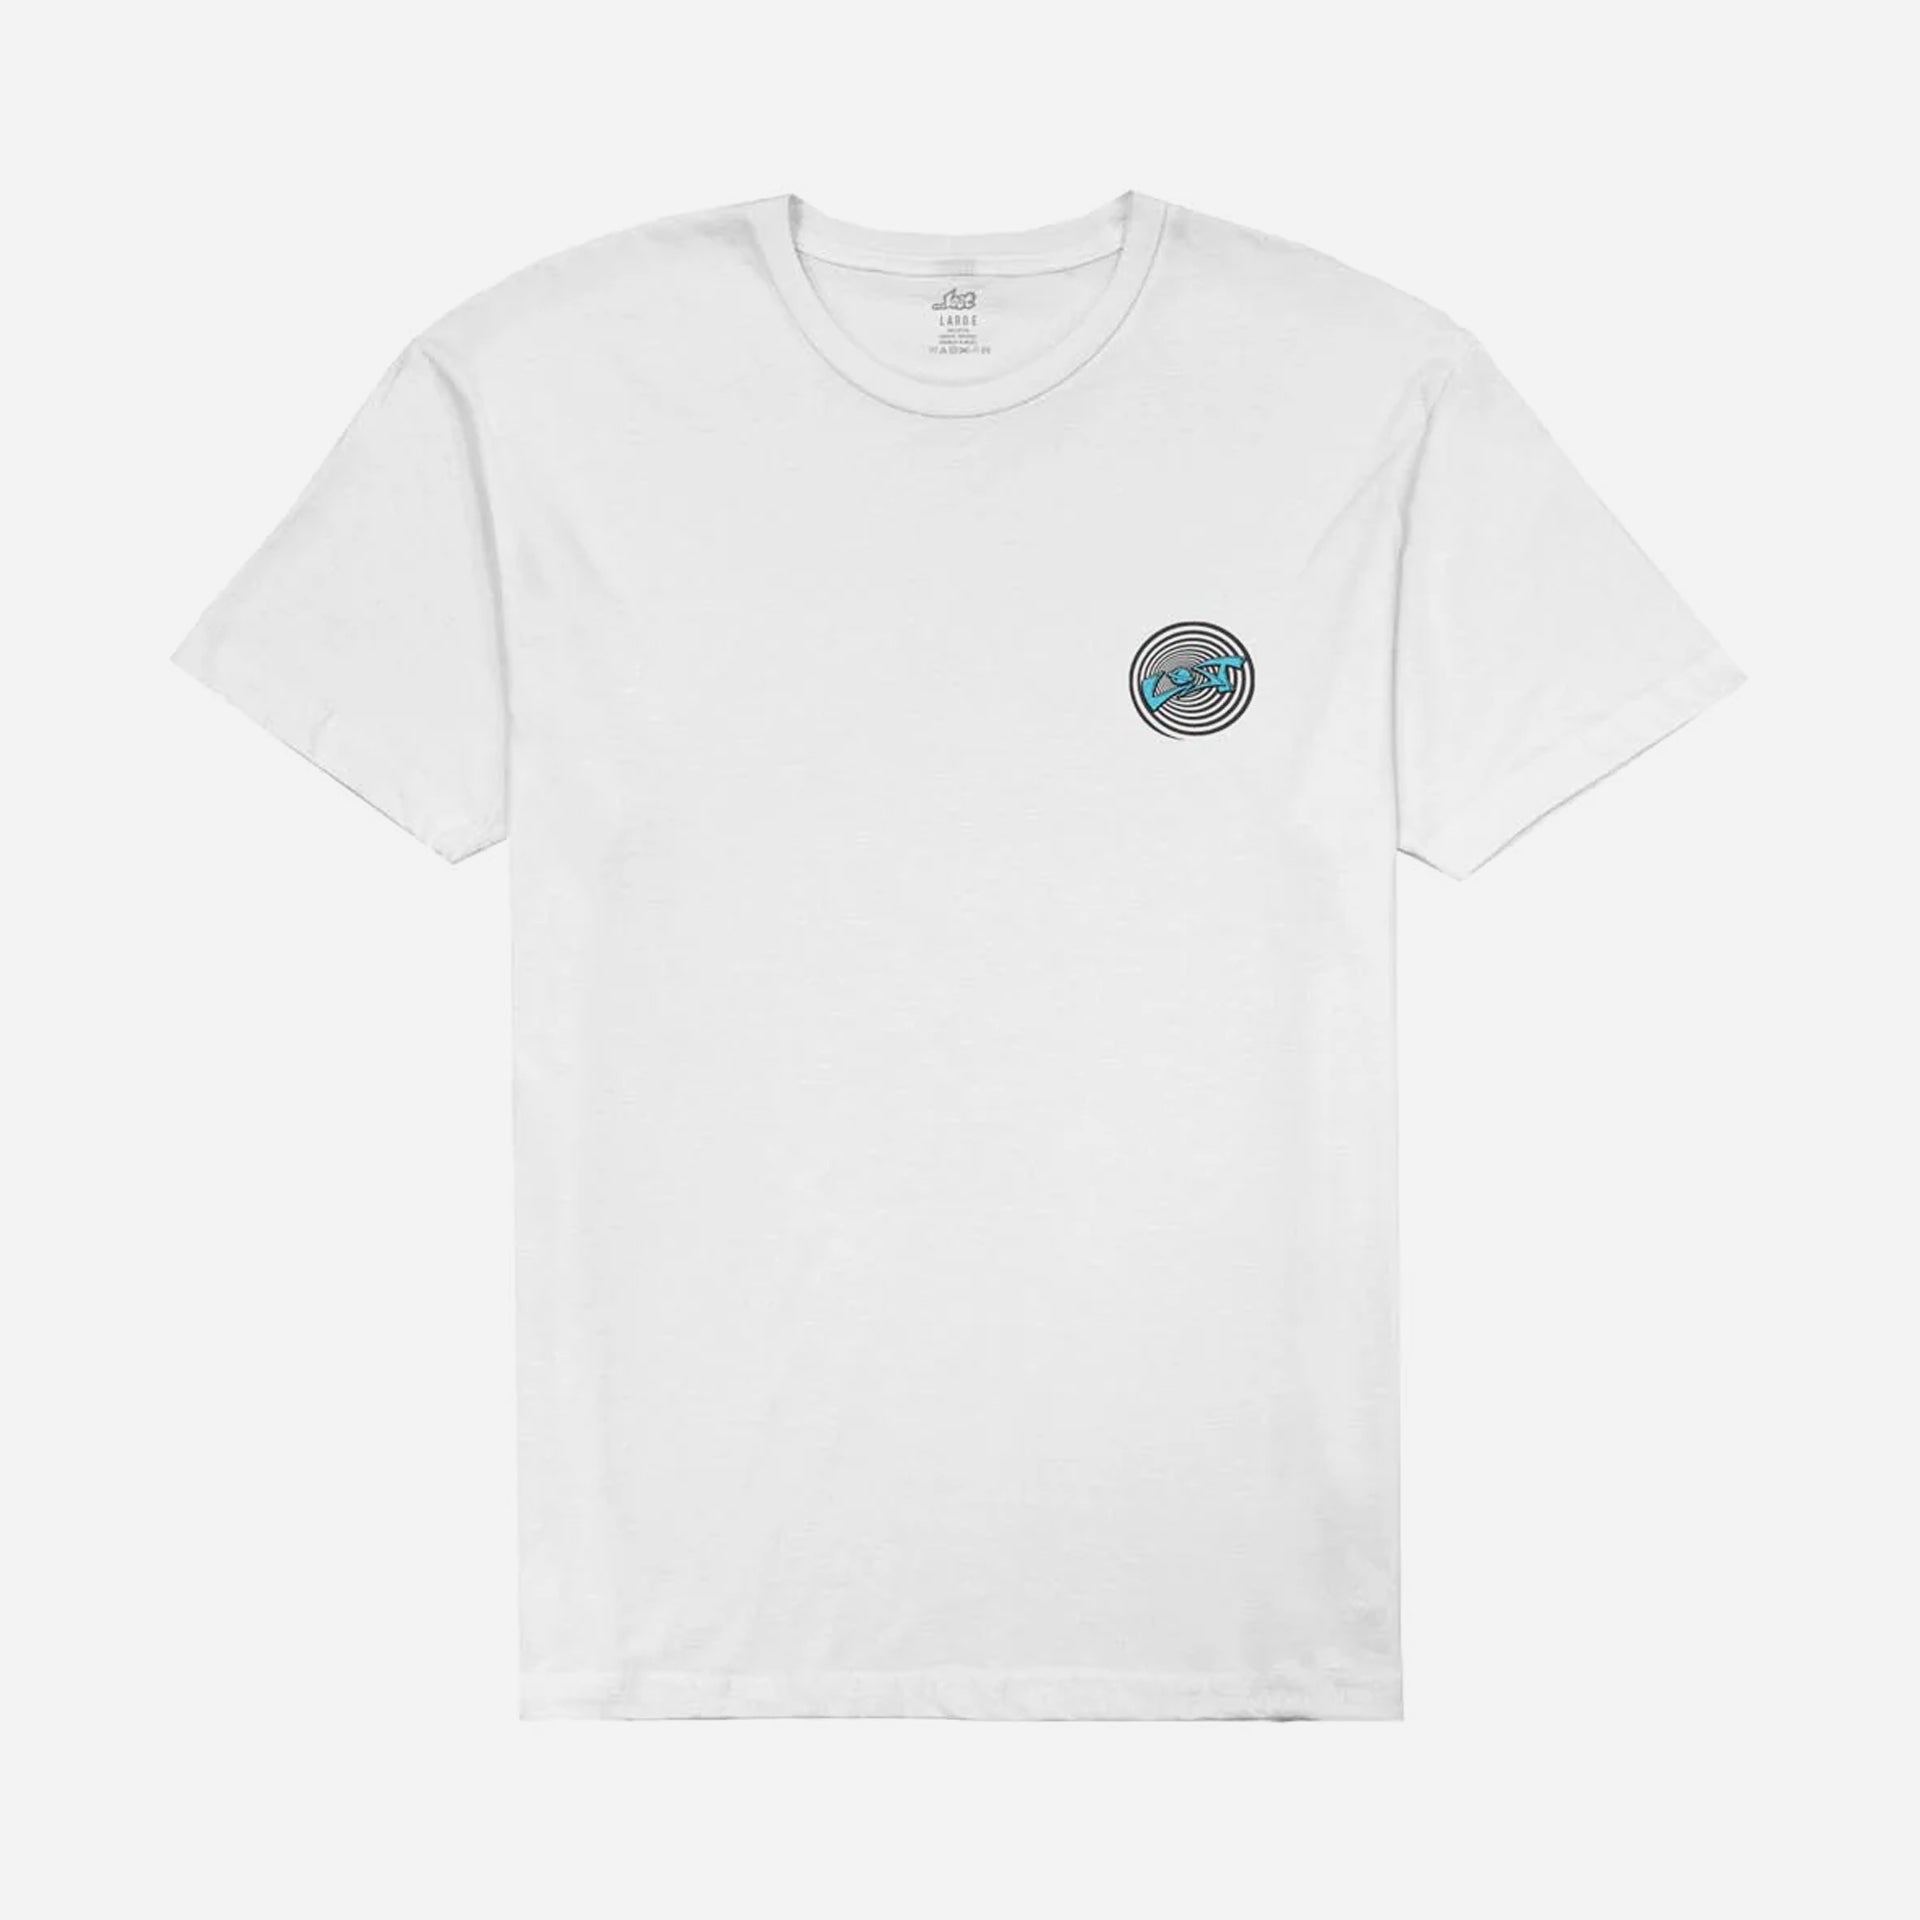 Lost Mens Surfboards T-Shirt - White - ManGo Surfing